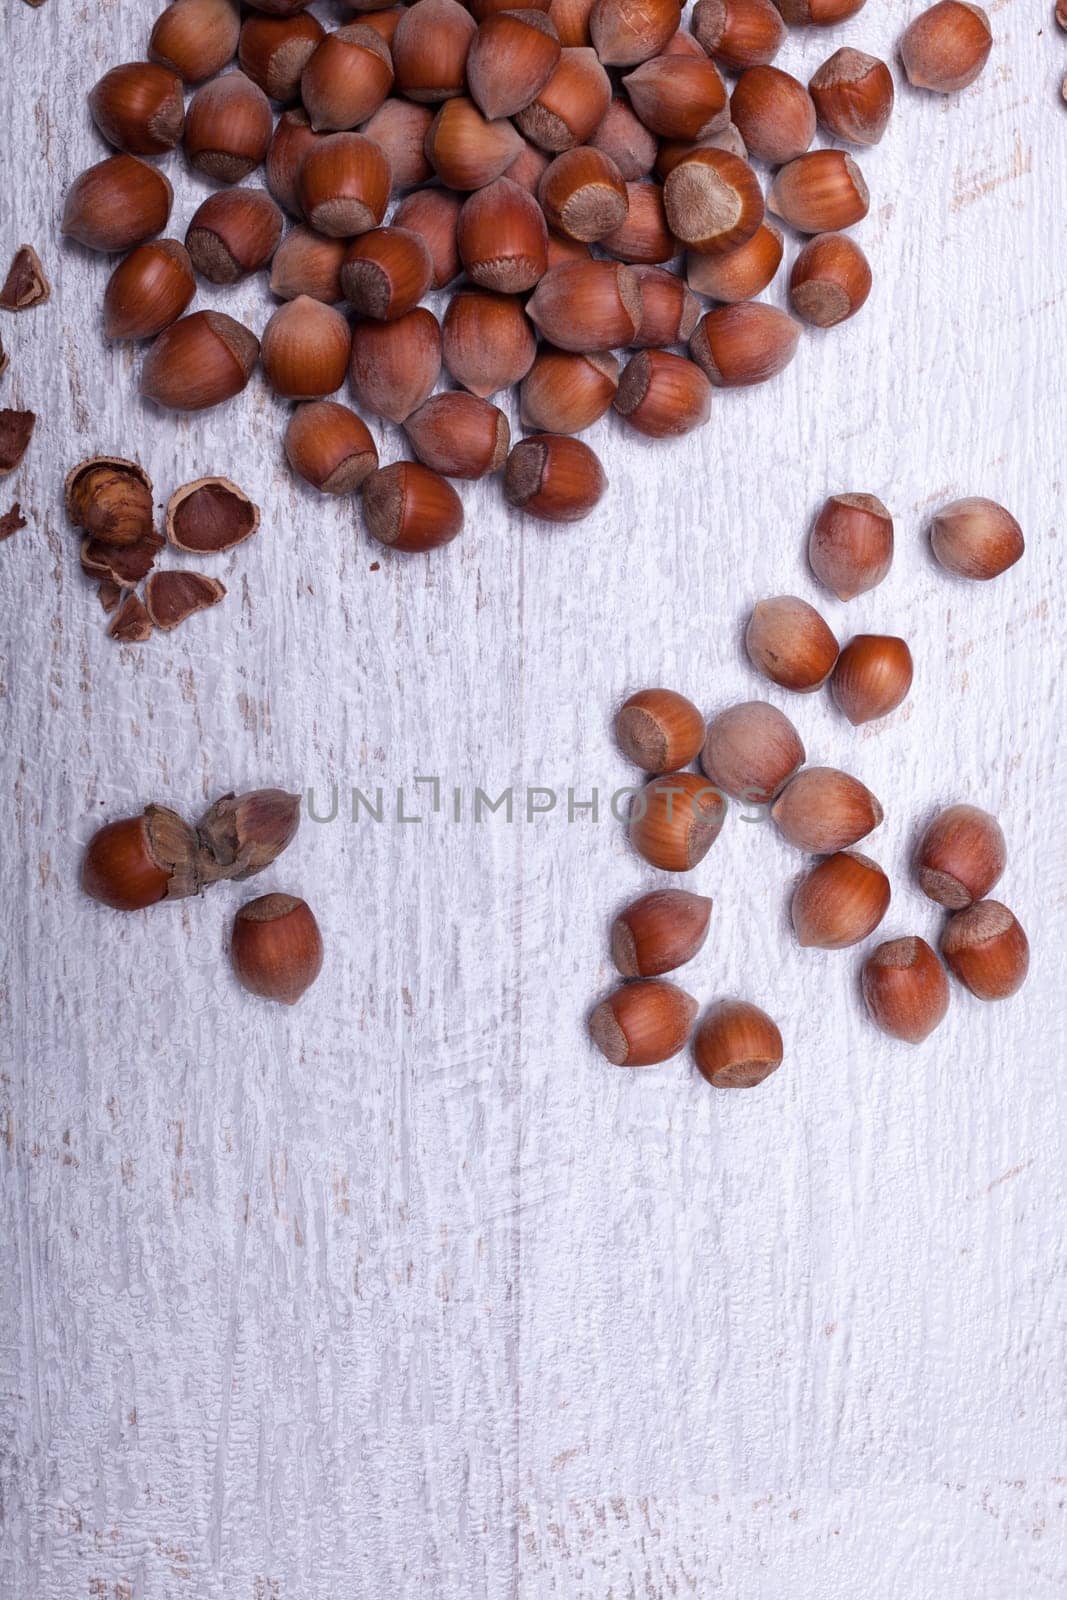 Hazelnuts on wooden background. Over top view